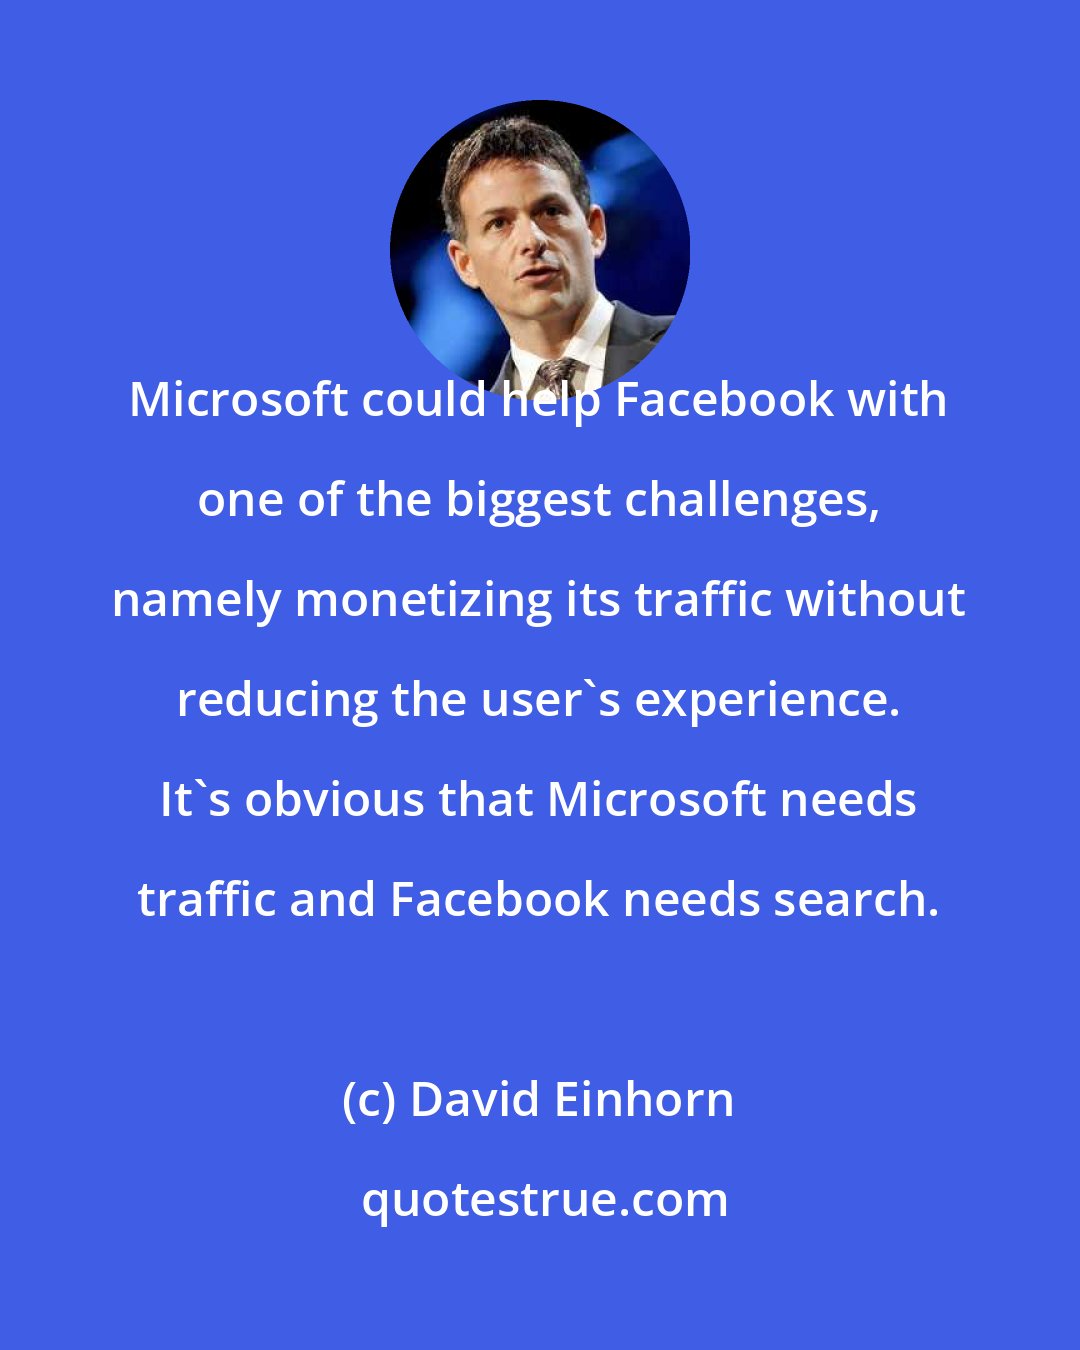 David Einhorn: Microsoft could help Facebook with one of the biggest challenges, namely monetizing its traffic without reducing the user's experience. It's obvious that Microsoft needs traffic and Facebook needs search.